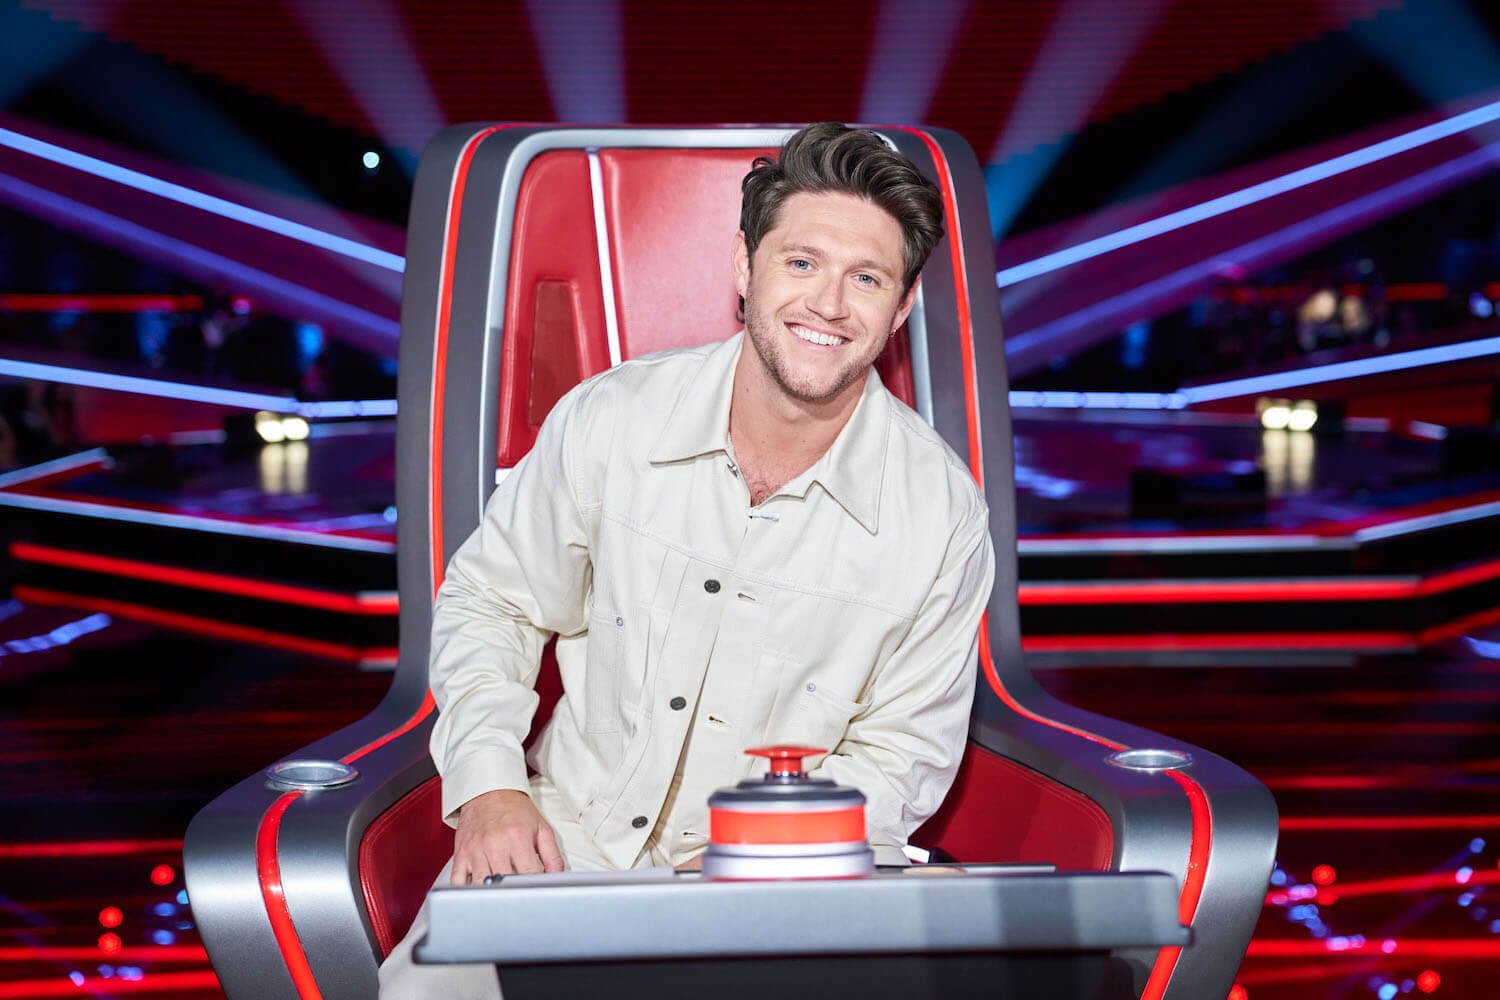 'The Voice' Season 24 judge Niall Horan sitting in the judge's chair and smiling